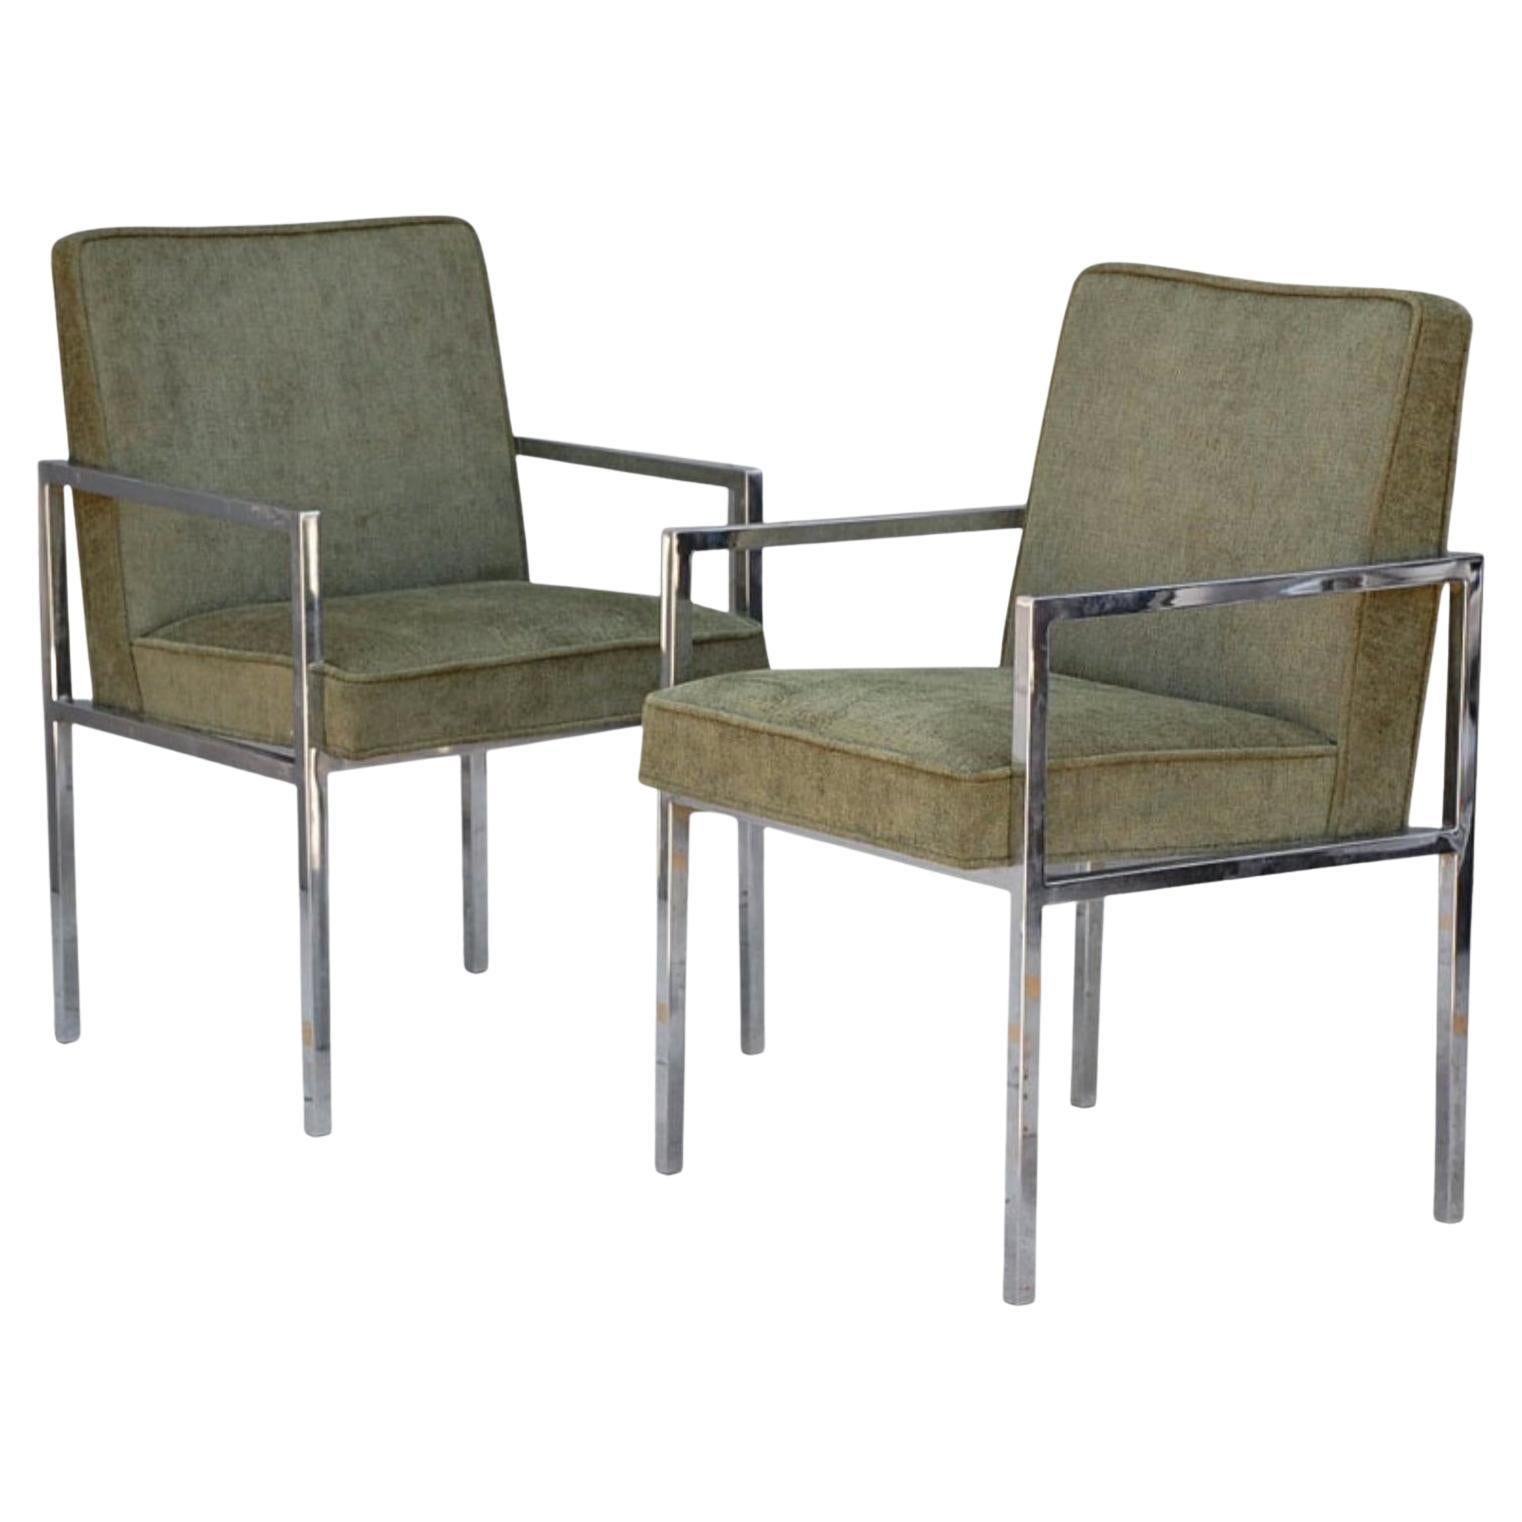 Pair of Chic Chromed Steel Upholstered Armchairs For Sale